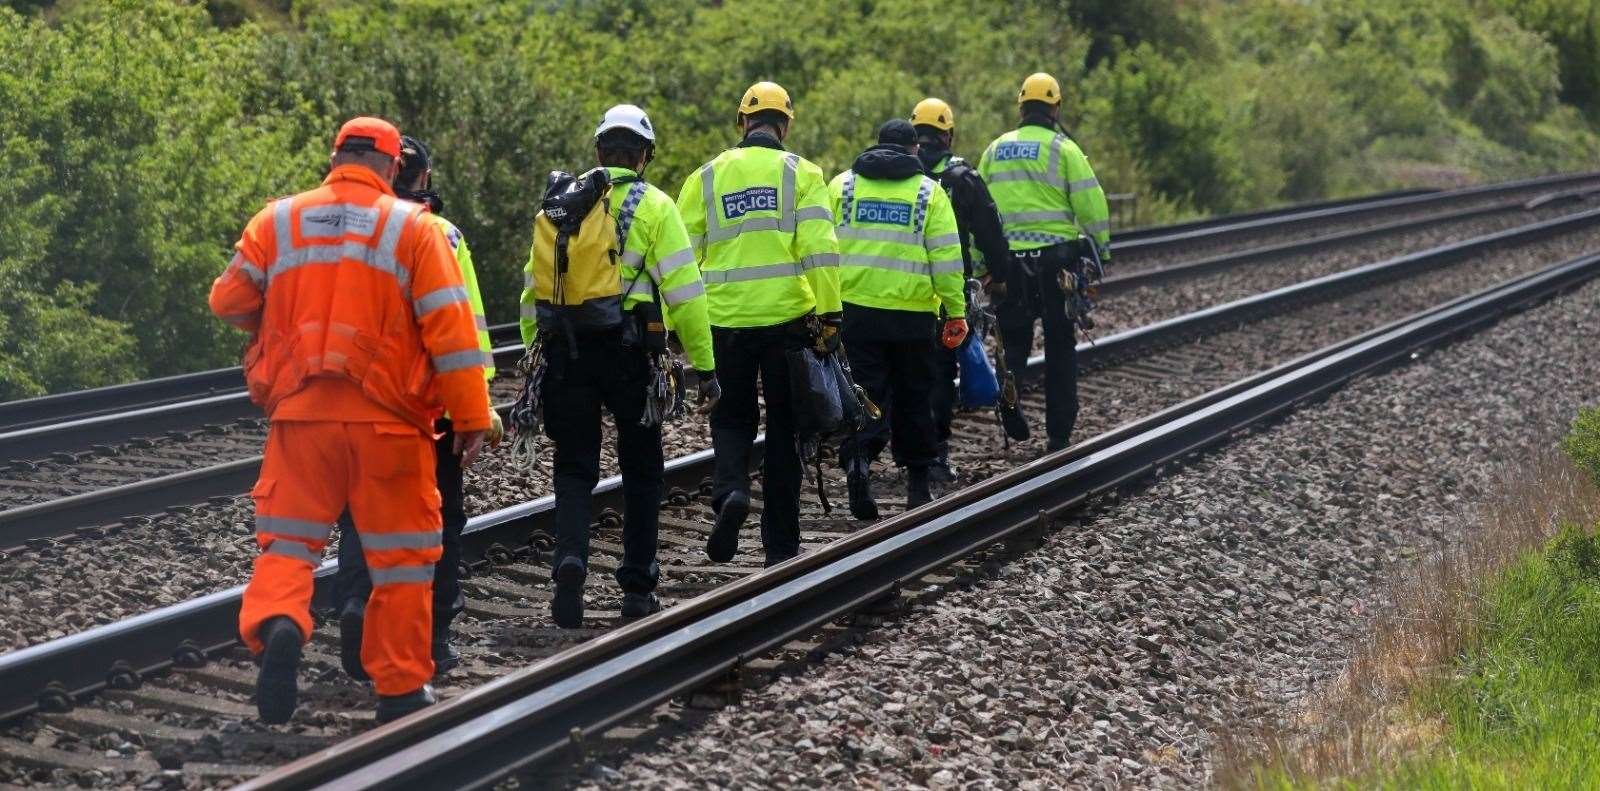 Police teams search railway tracks in Aylesham Picture: UKNIP